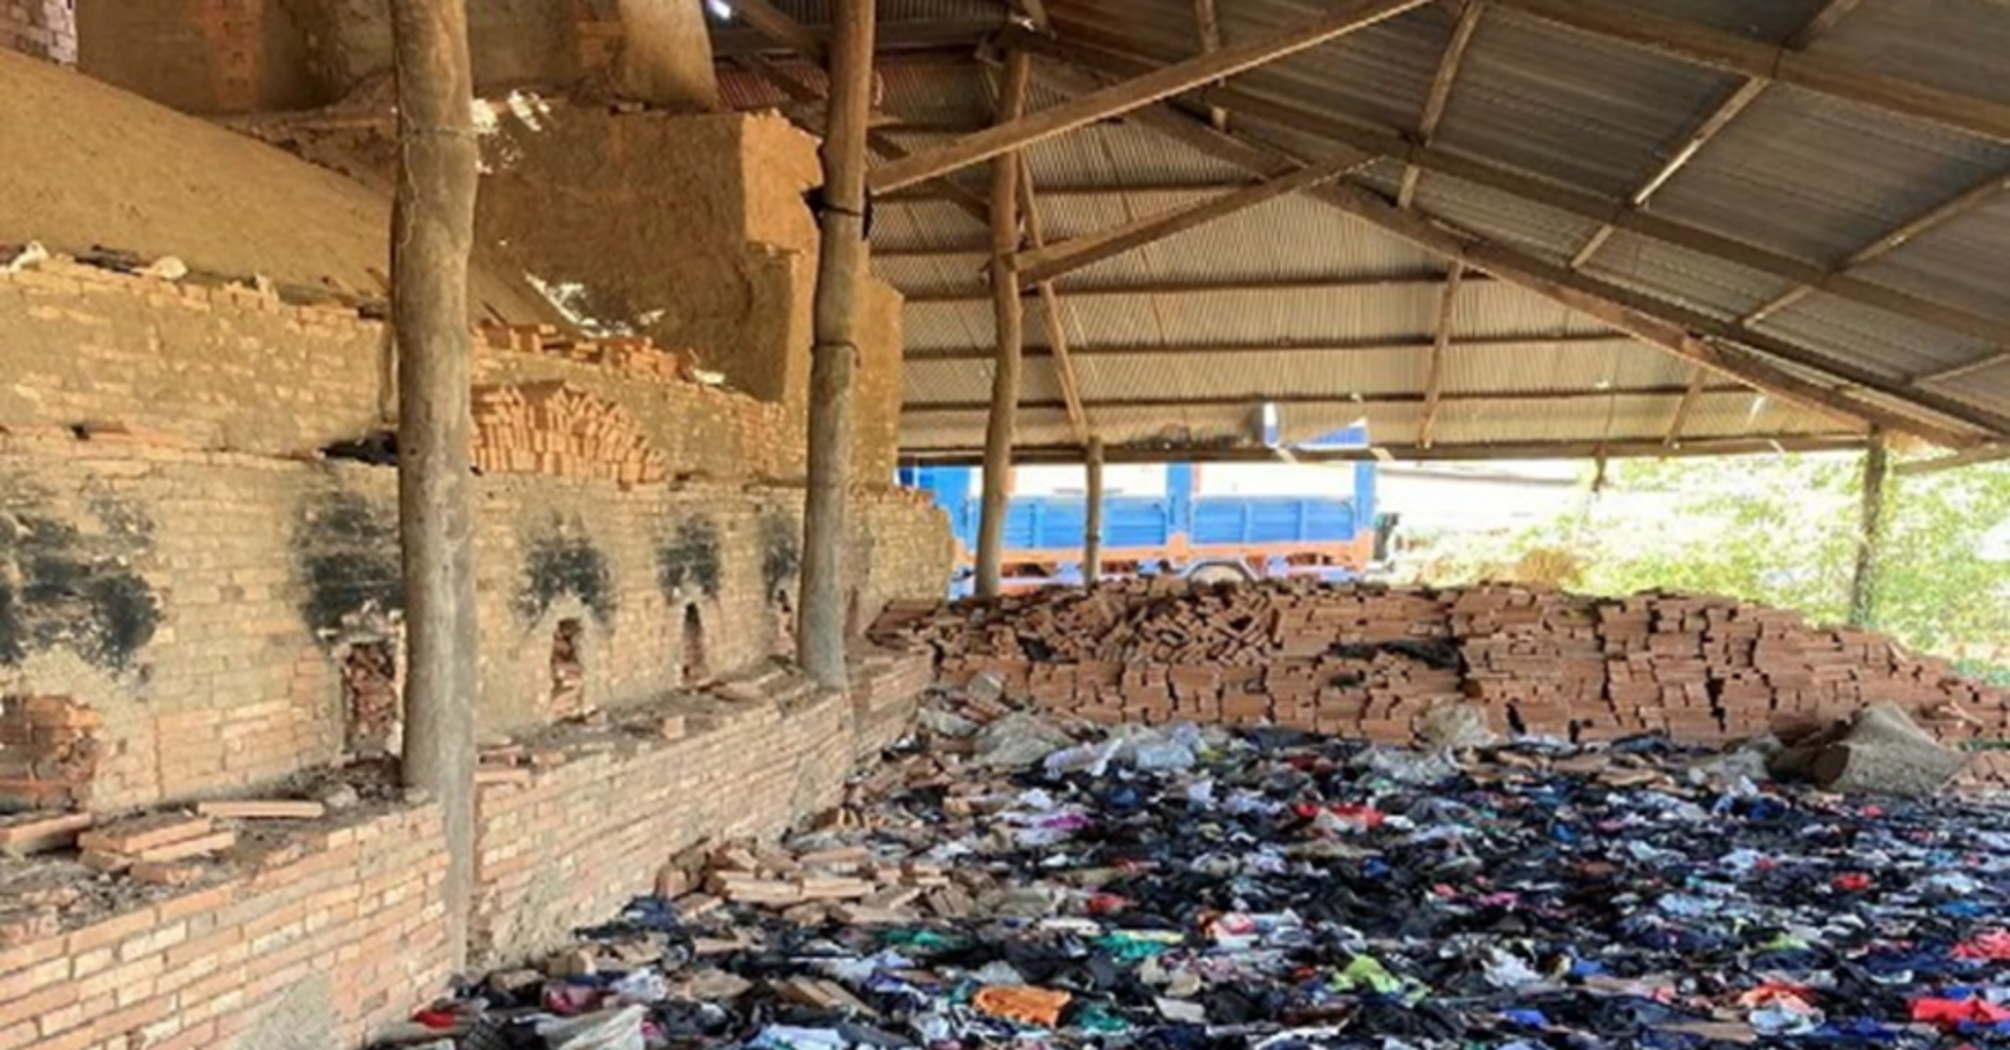 Waste from world-famous brands is burned in Cambodia